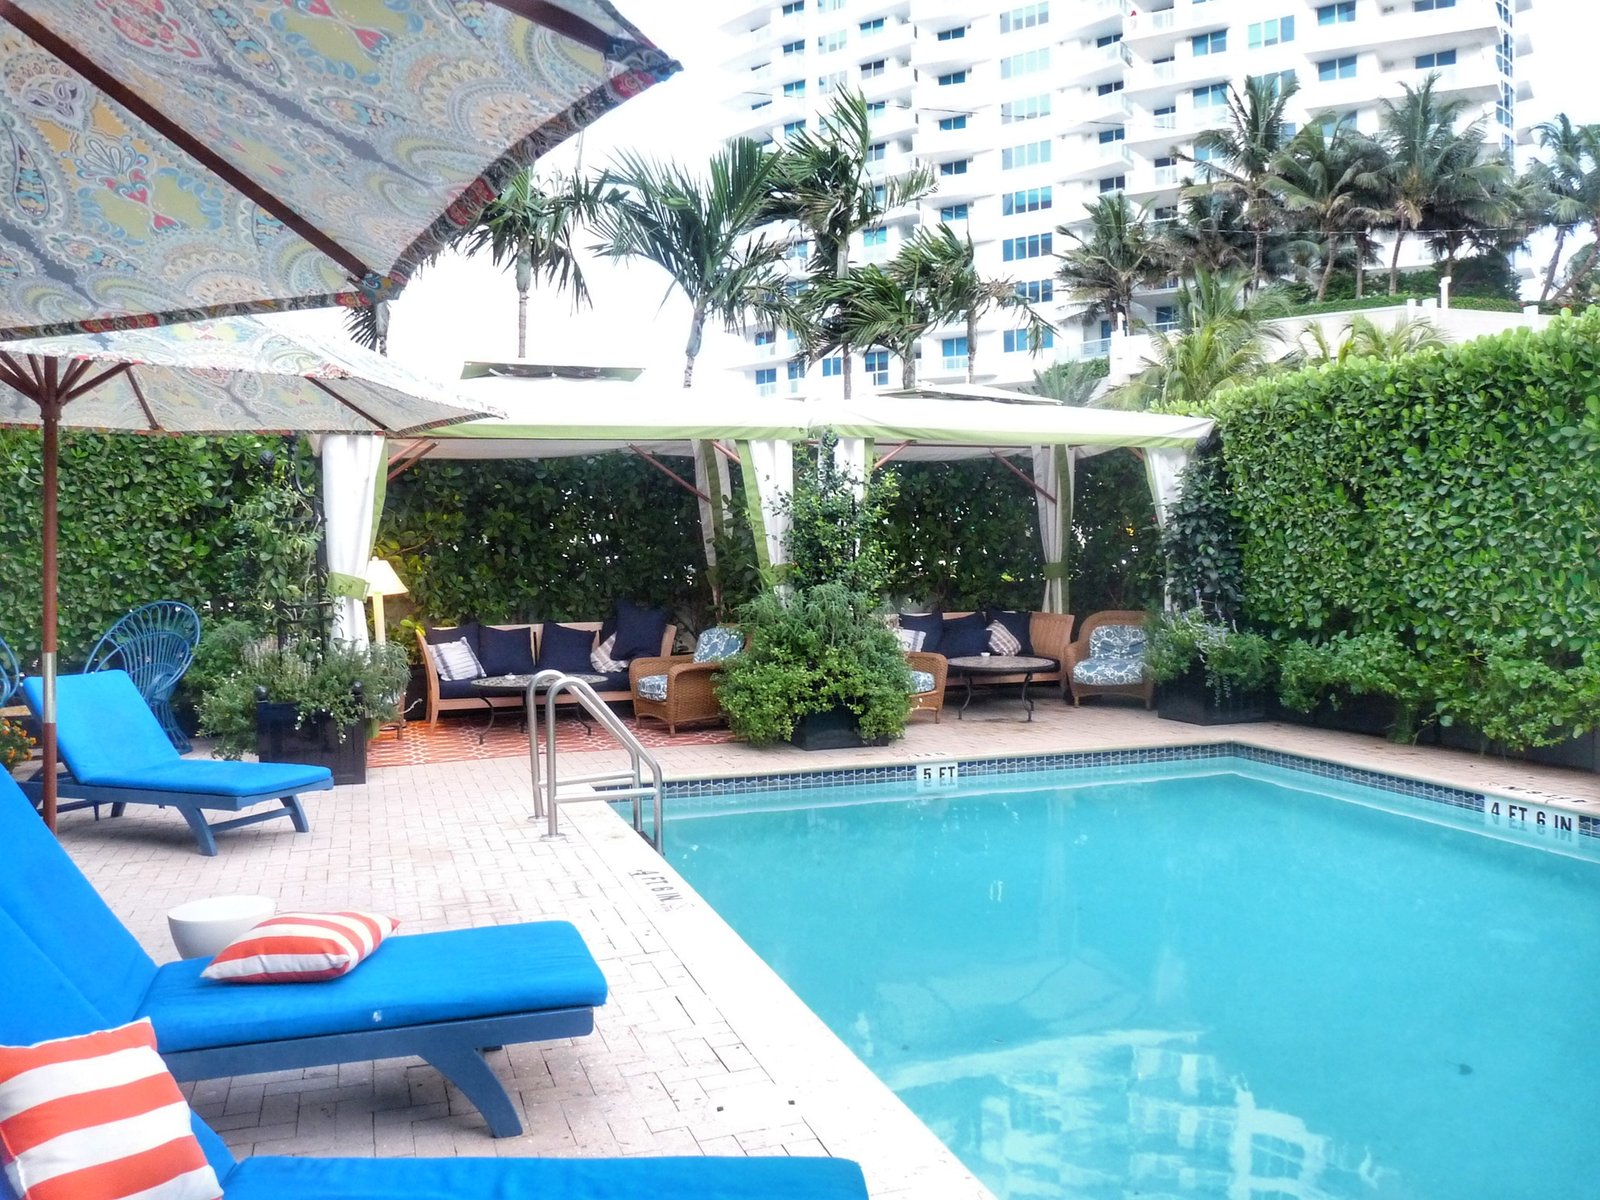 Where to stay in Miami Beach on a budget